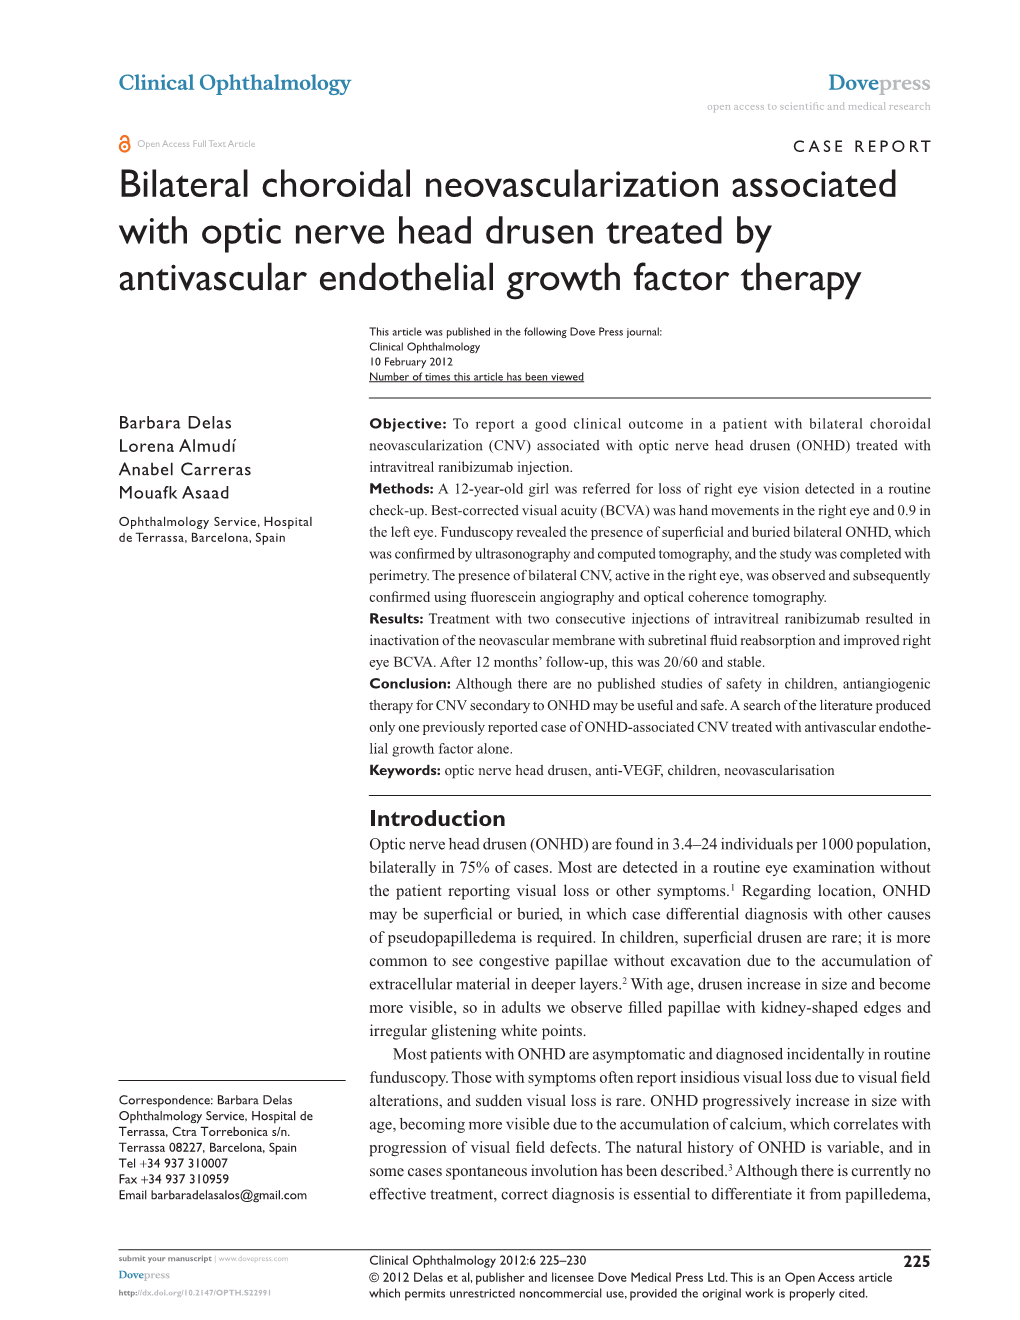 Bilateral Choroidal Neovascularization Associated with Optic Nerve Head Drusen Treated by Antivascular Endothelial Growth Factor Therapy